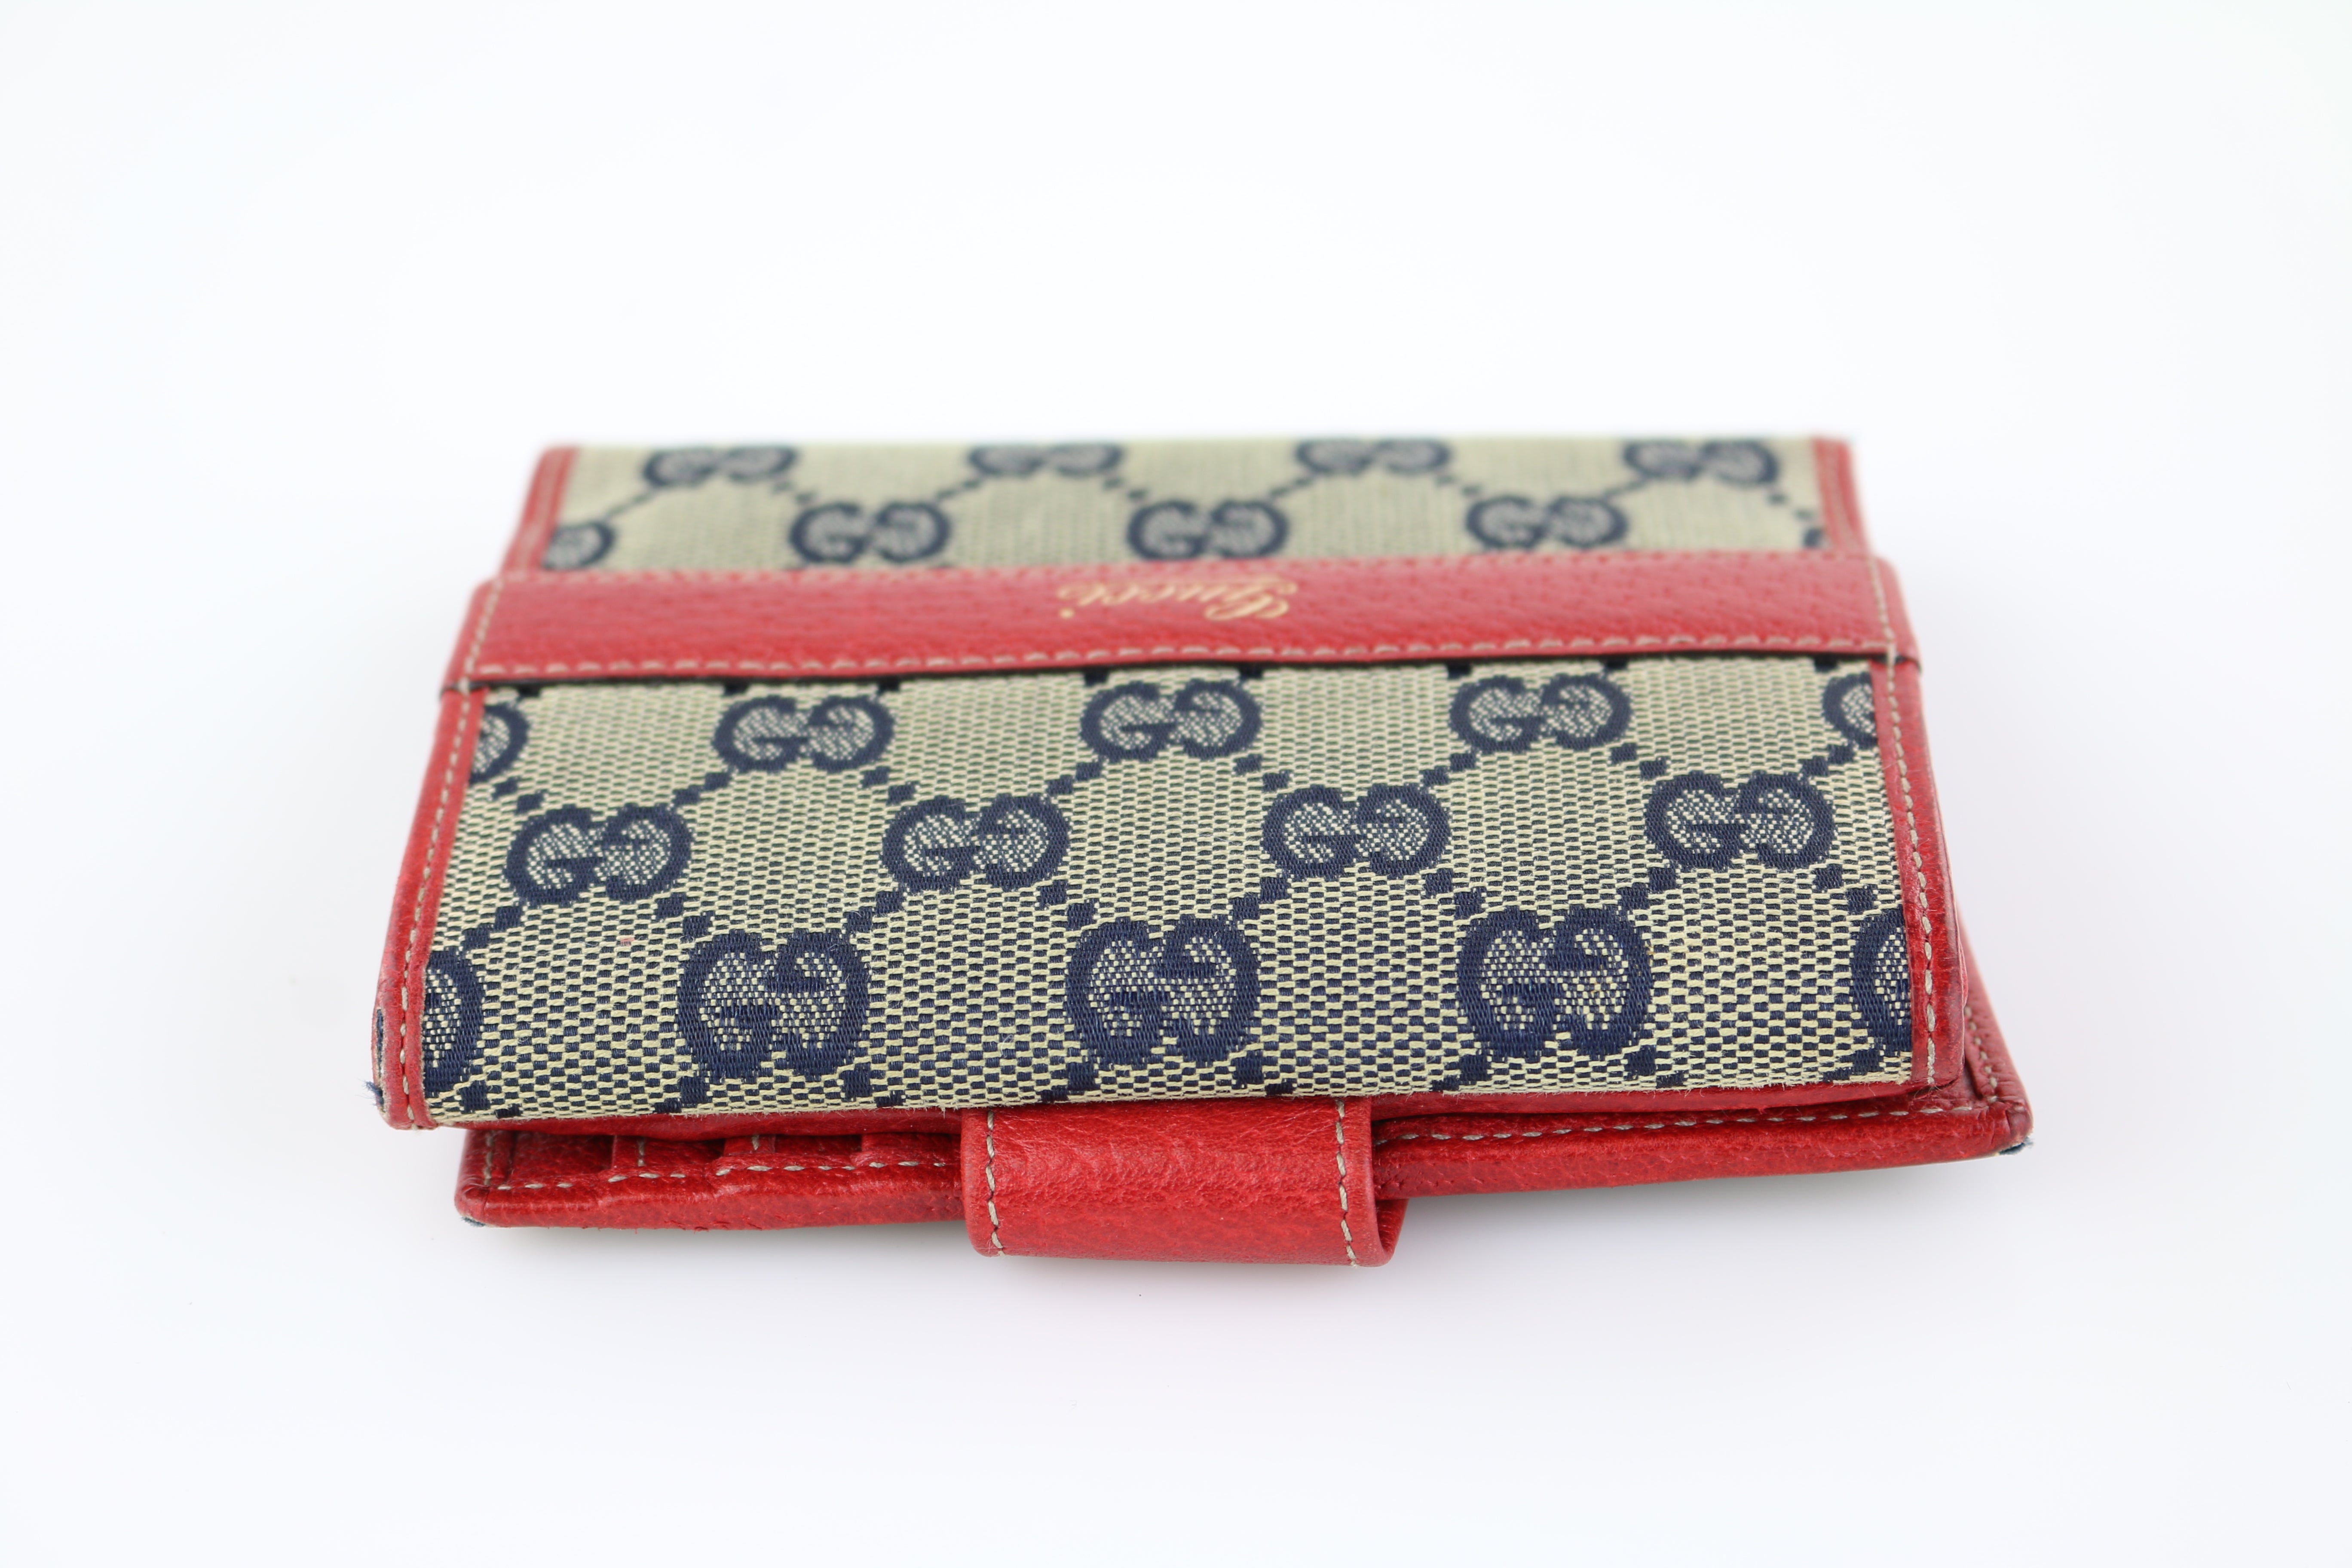 Gucci GG Supreme Embossed Leather Wallet Red